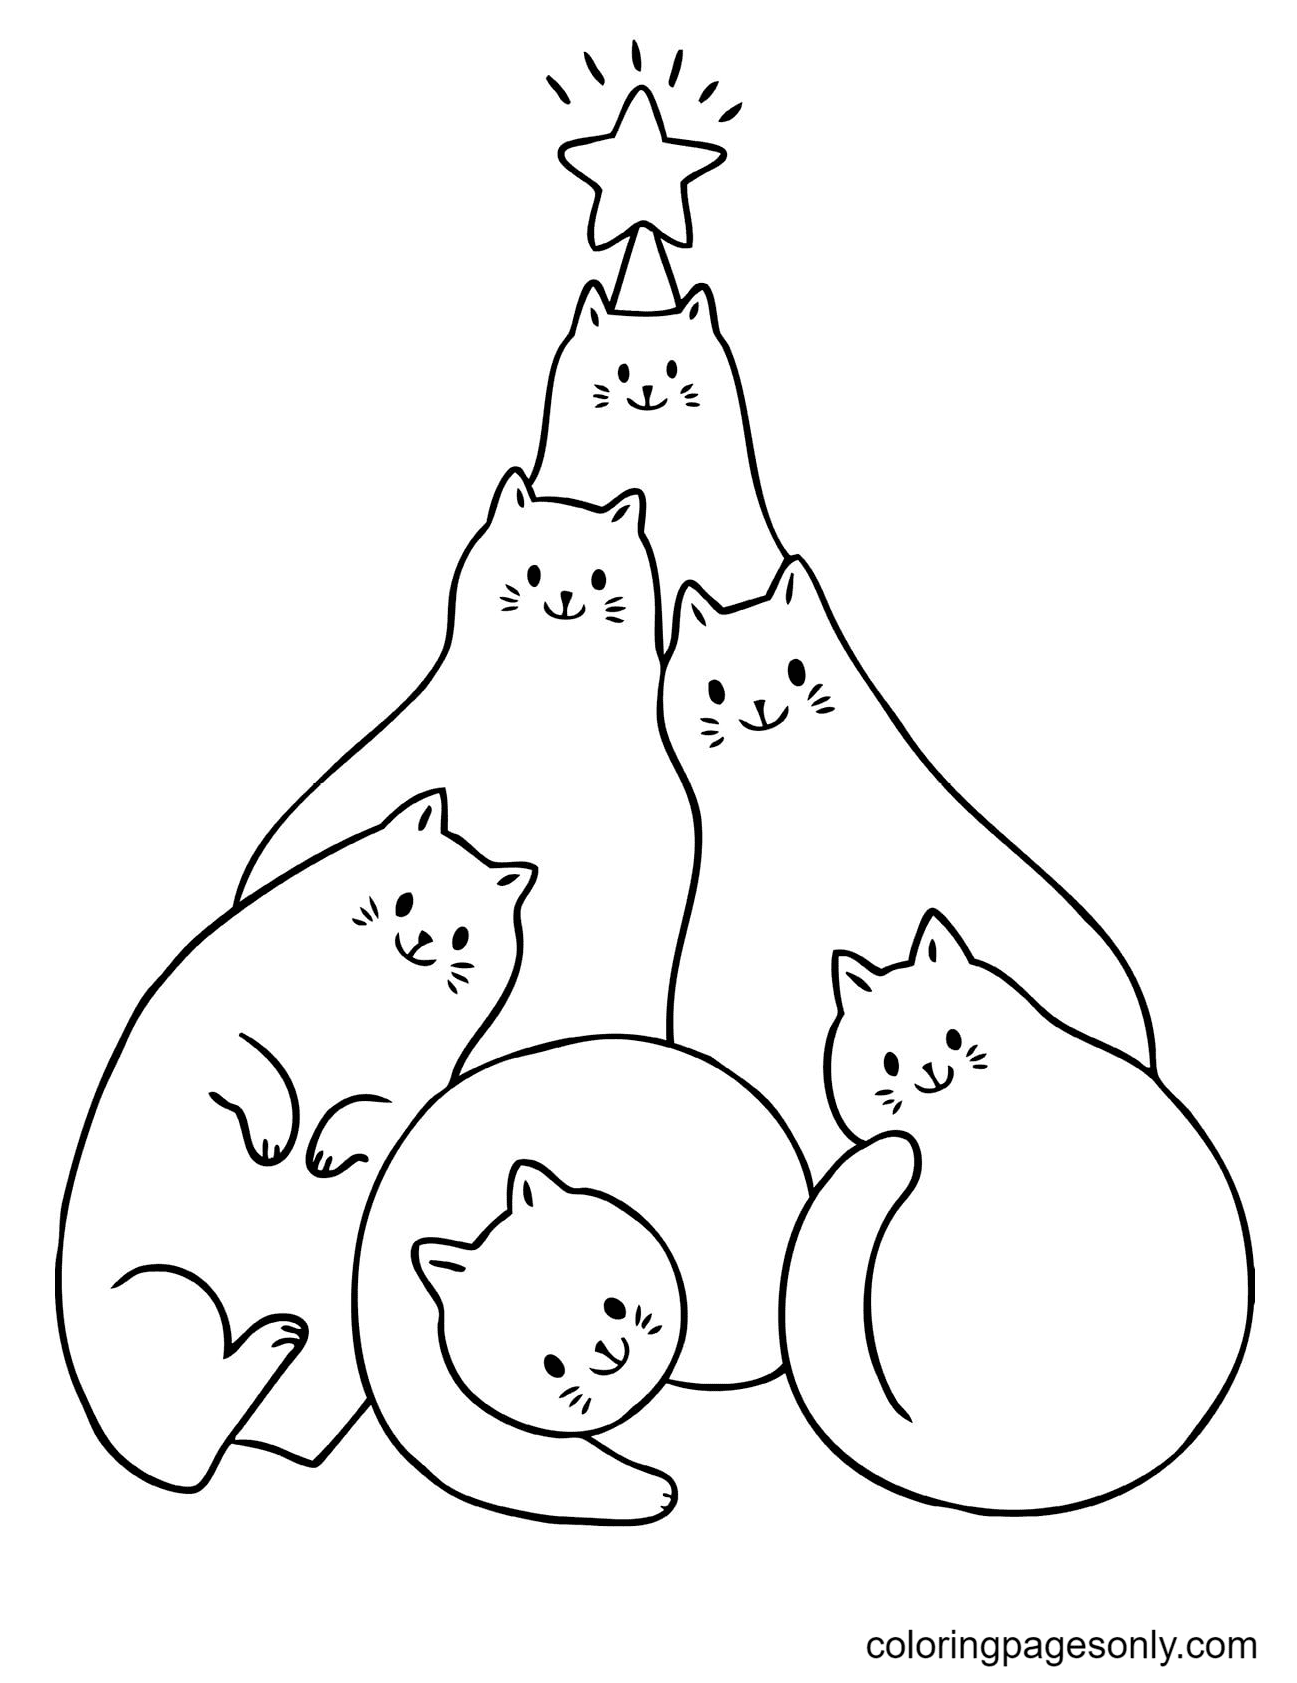 Christmas Tree Made of Cats Coloring Page